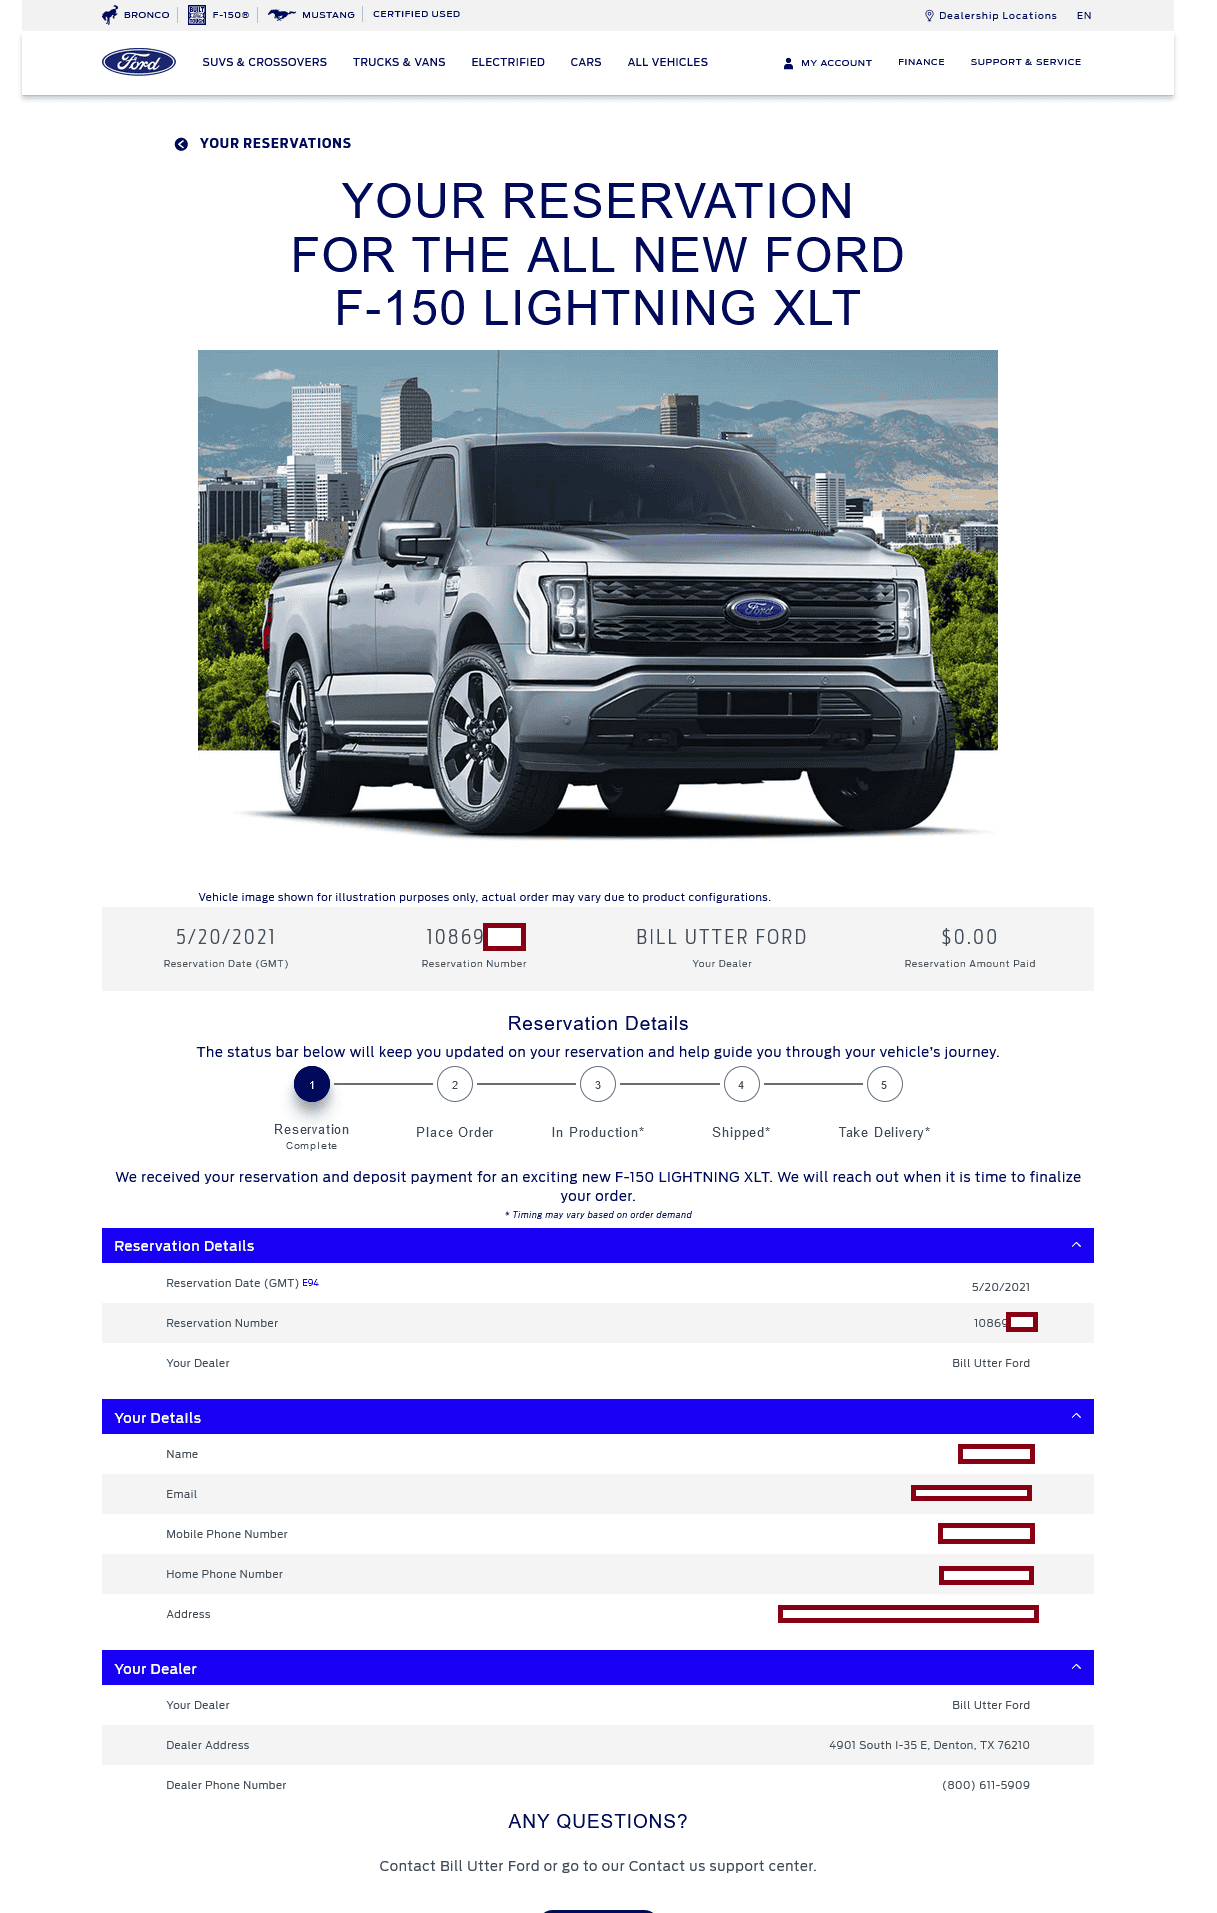 Ford F-150 Lightning Need help with dealer and reservation (RESOLVED) reservatio